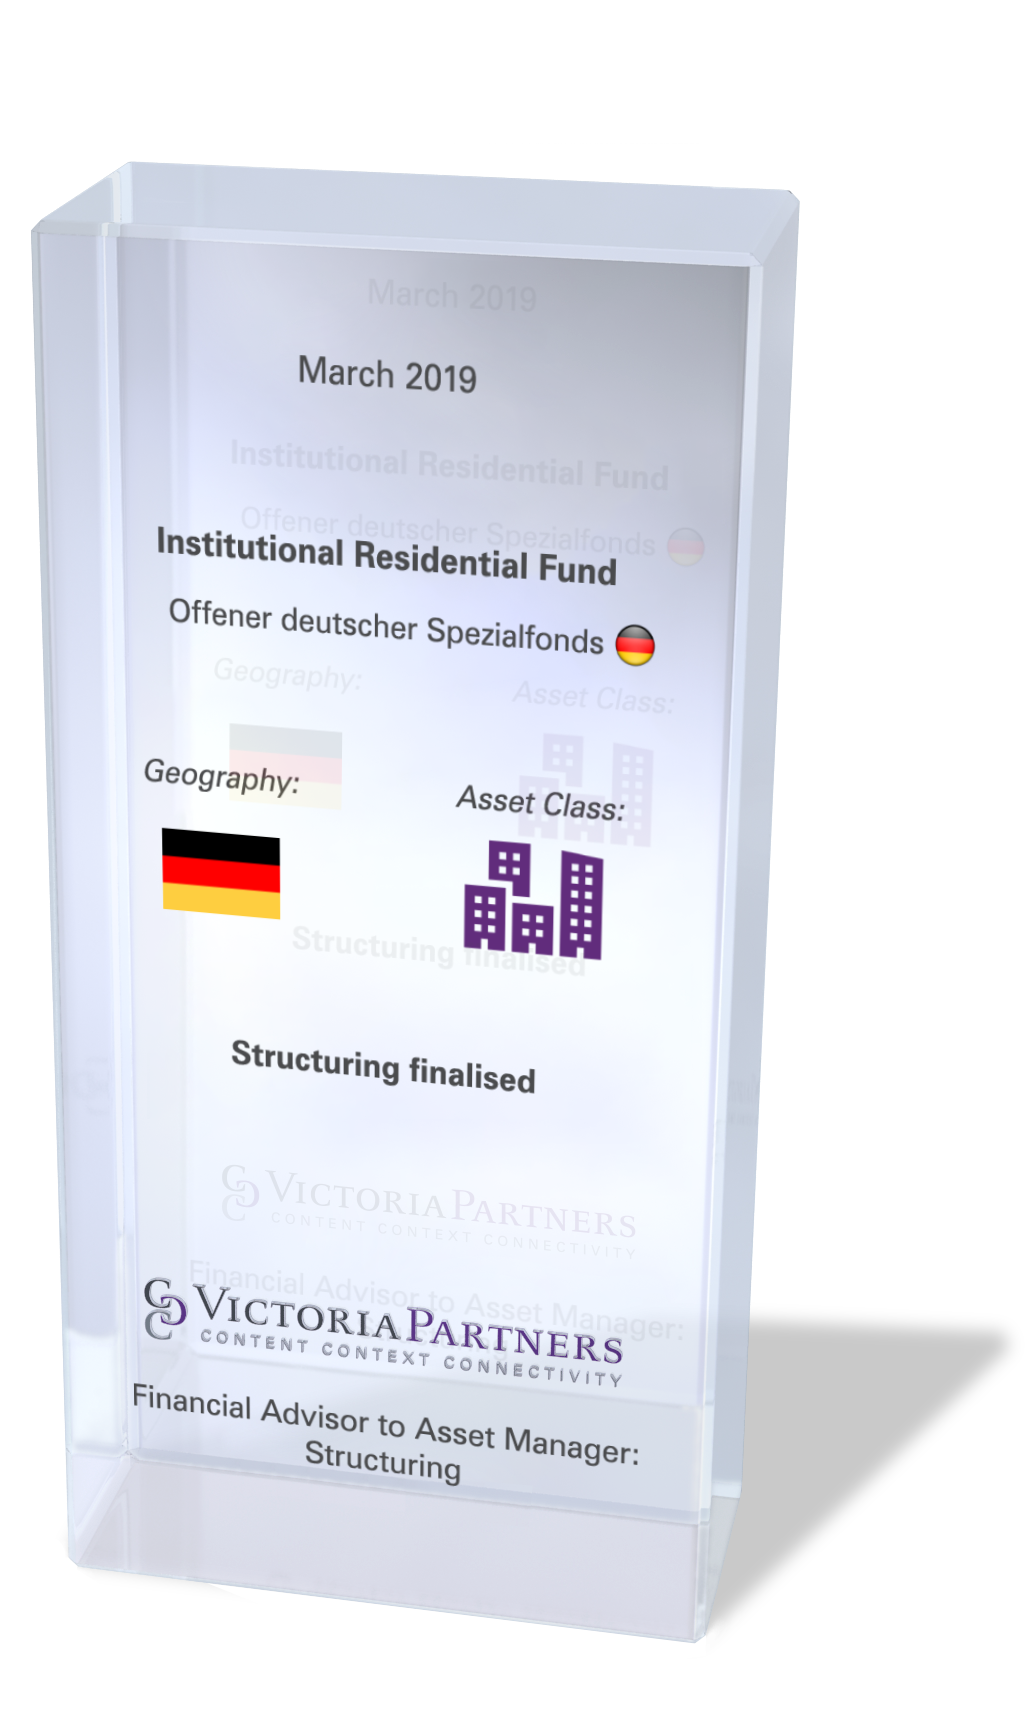 VICTORIAPARTNERS - Financial Advisor to Asset Manager: Structuring - March 2019